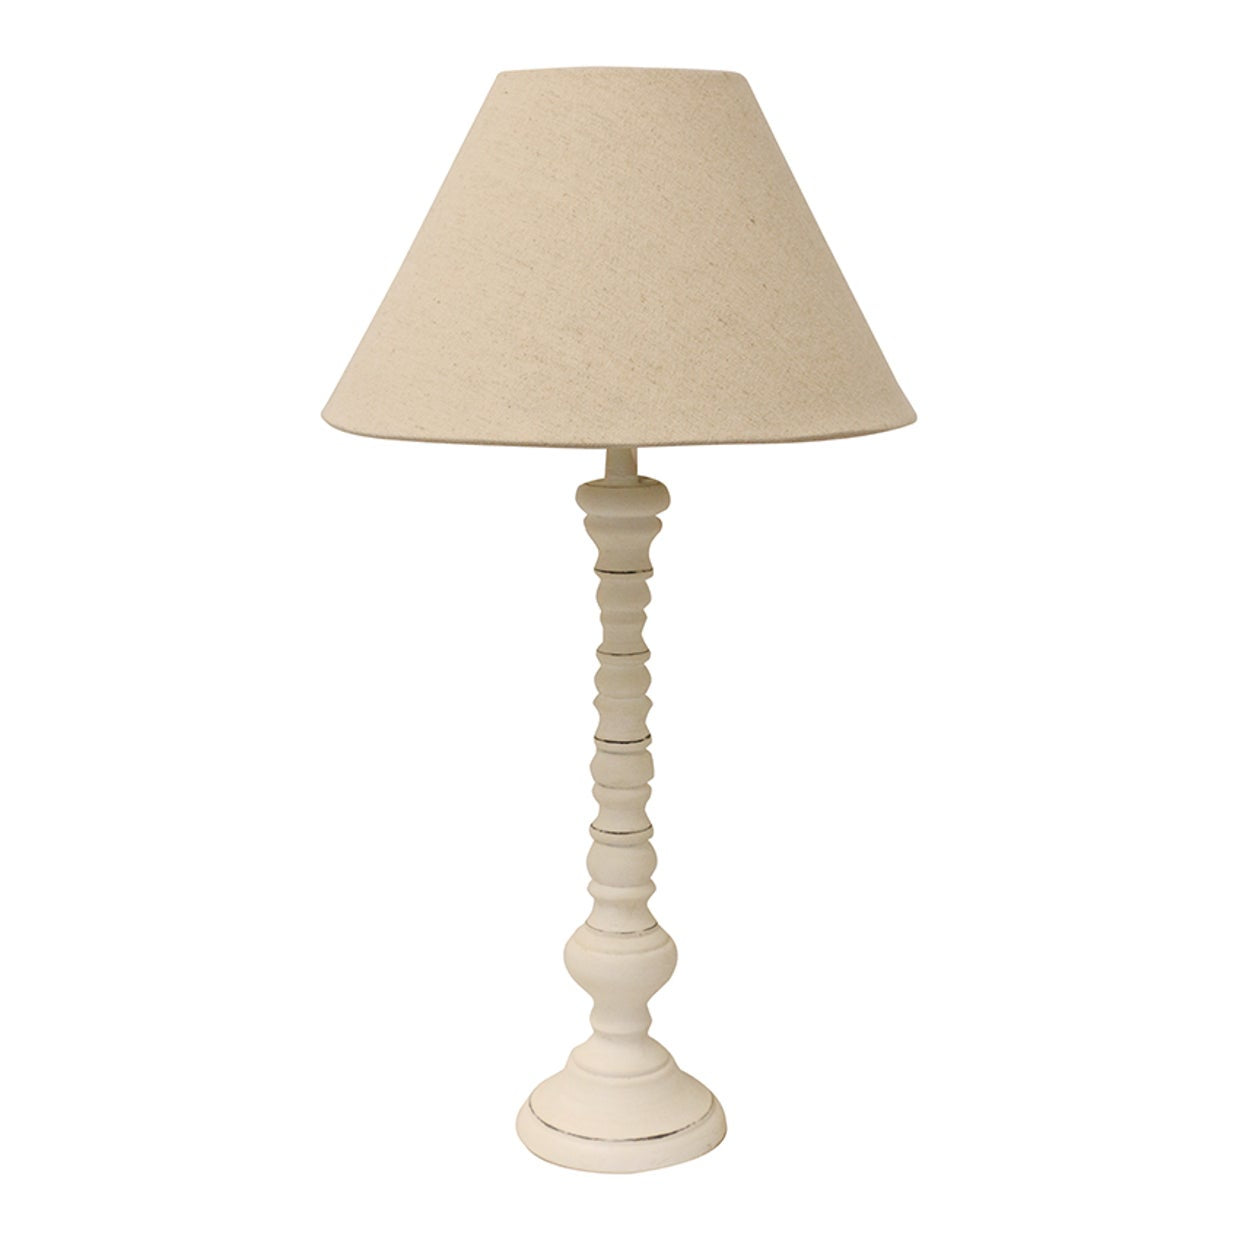 Lamp - Long Island White Base/Raw Linen Tapered Drum